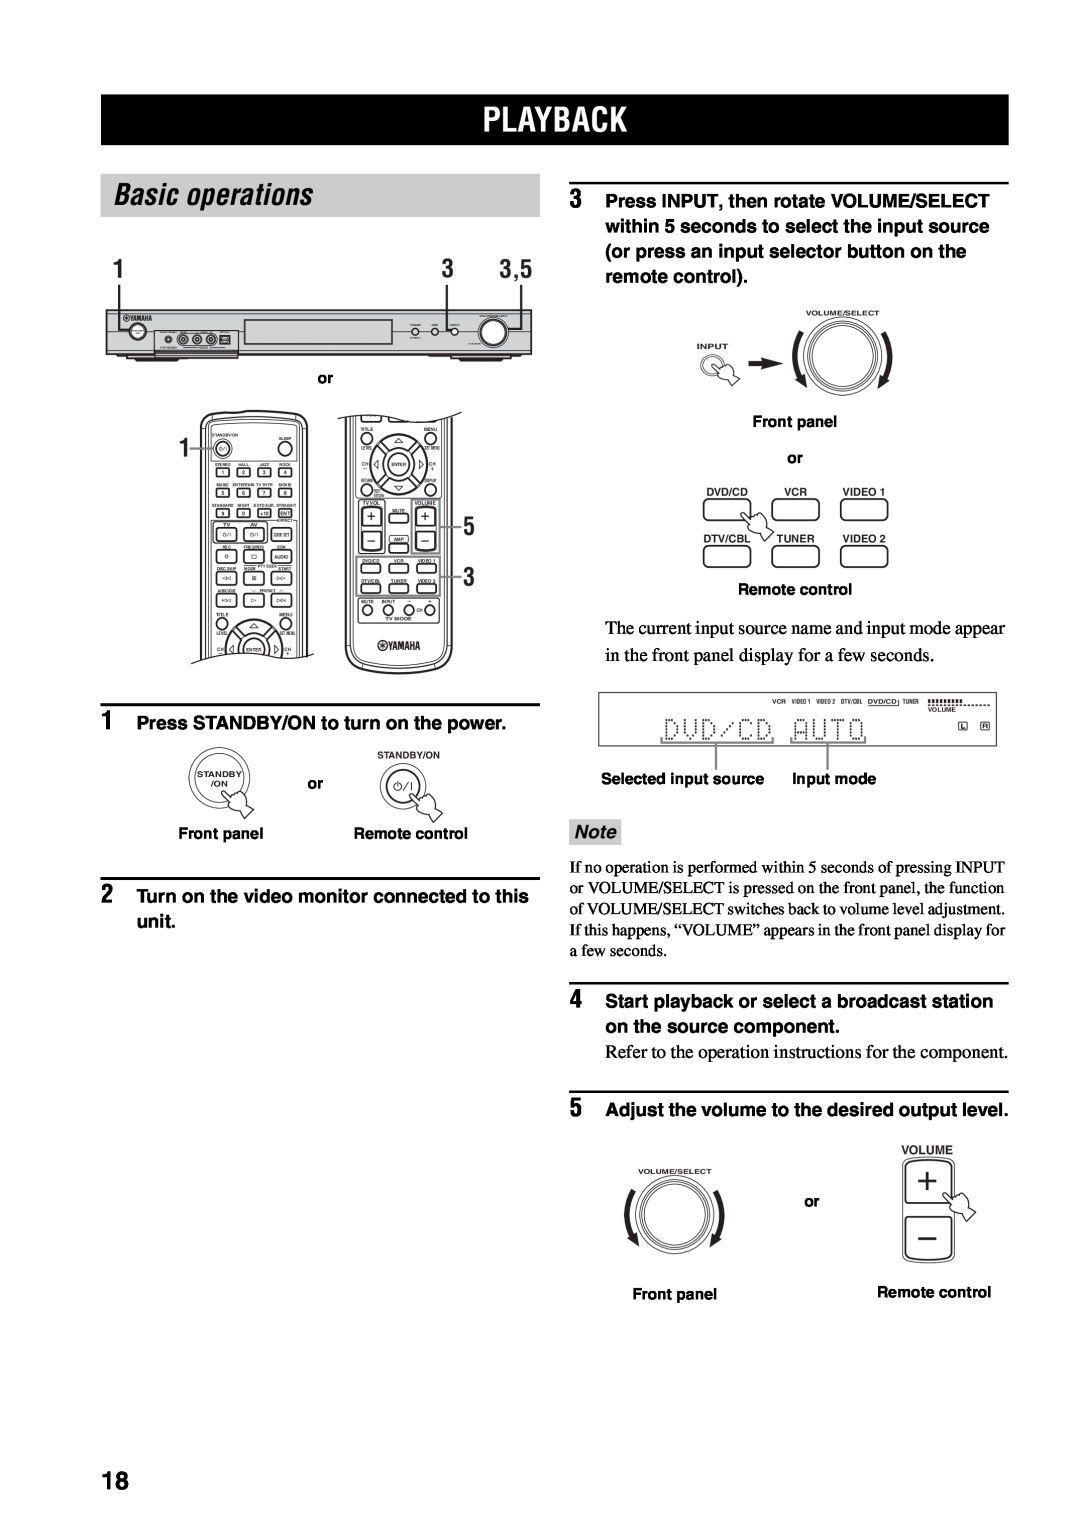 Yamaha RX-SL80 owner manual Playback, Basic operations, Press STANDBY/ON to turn on the power 